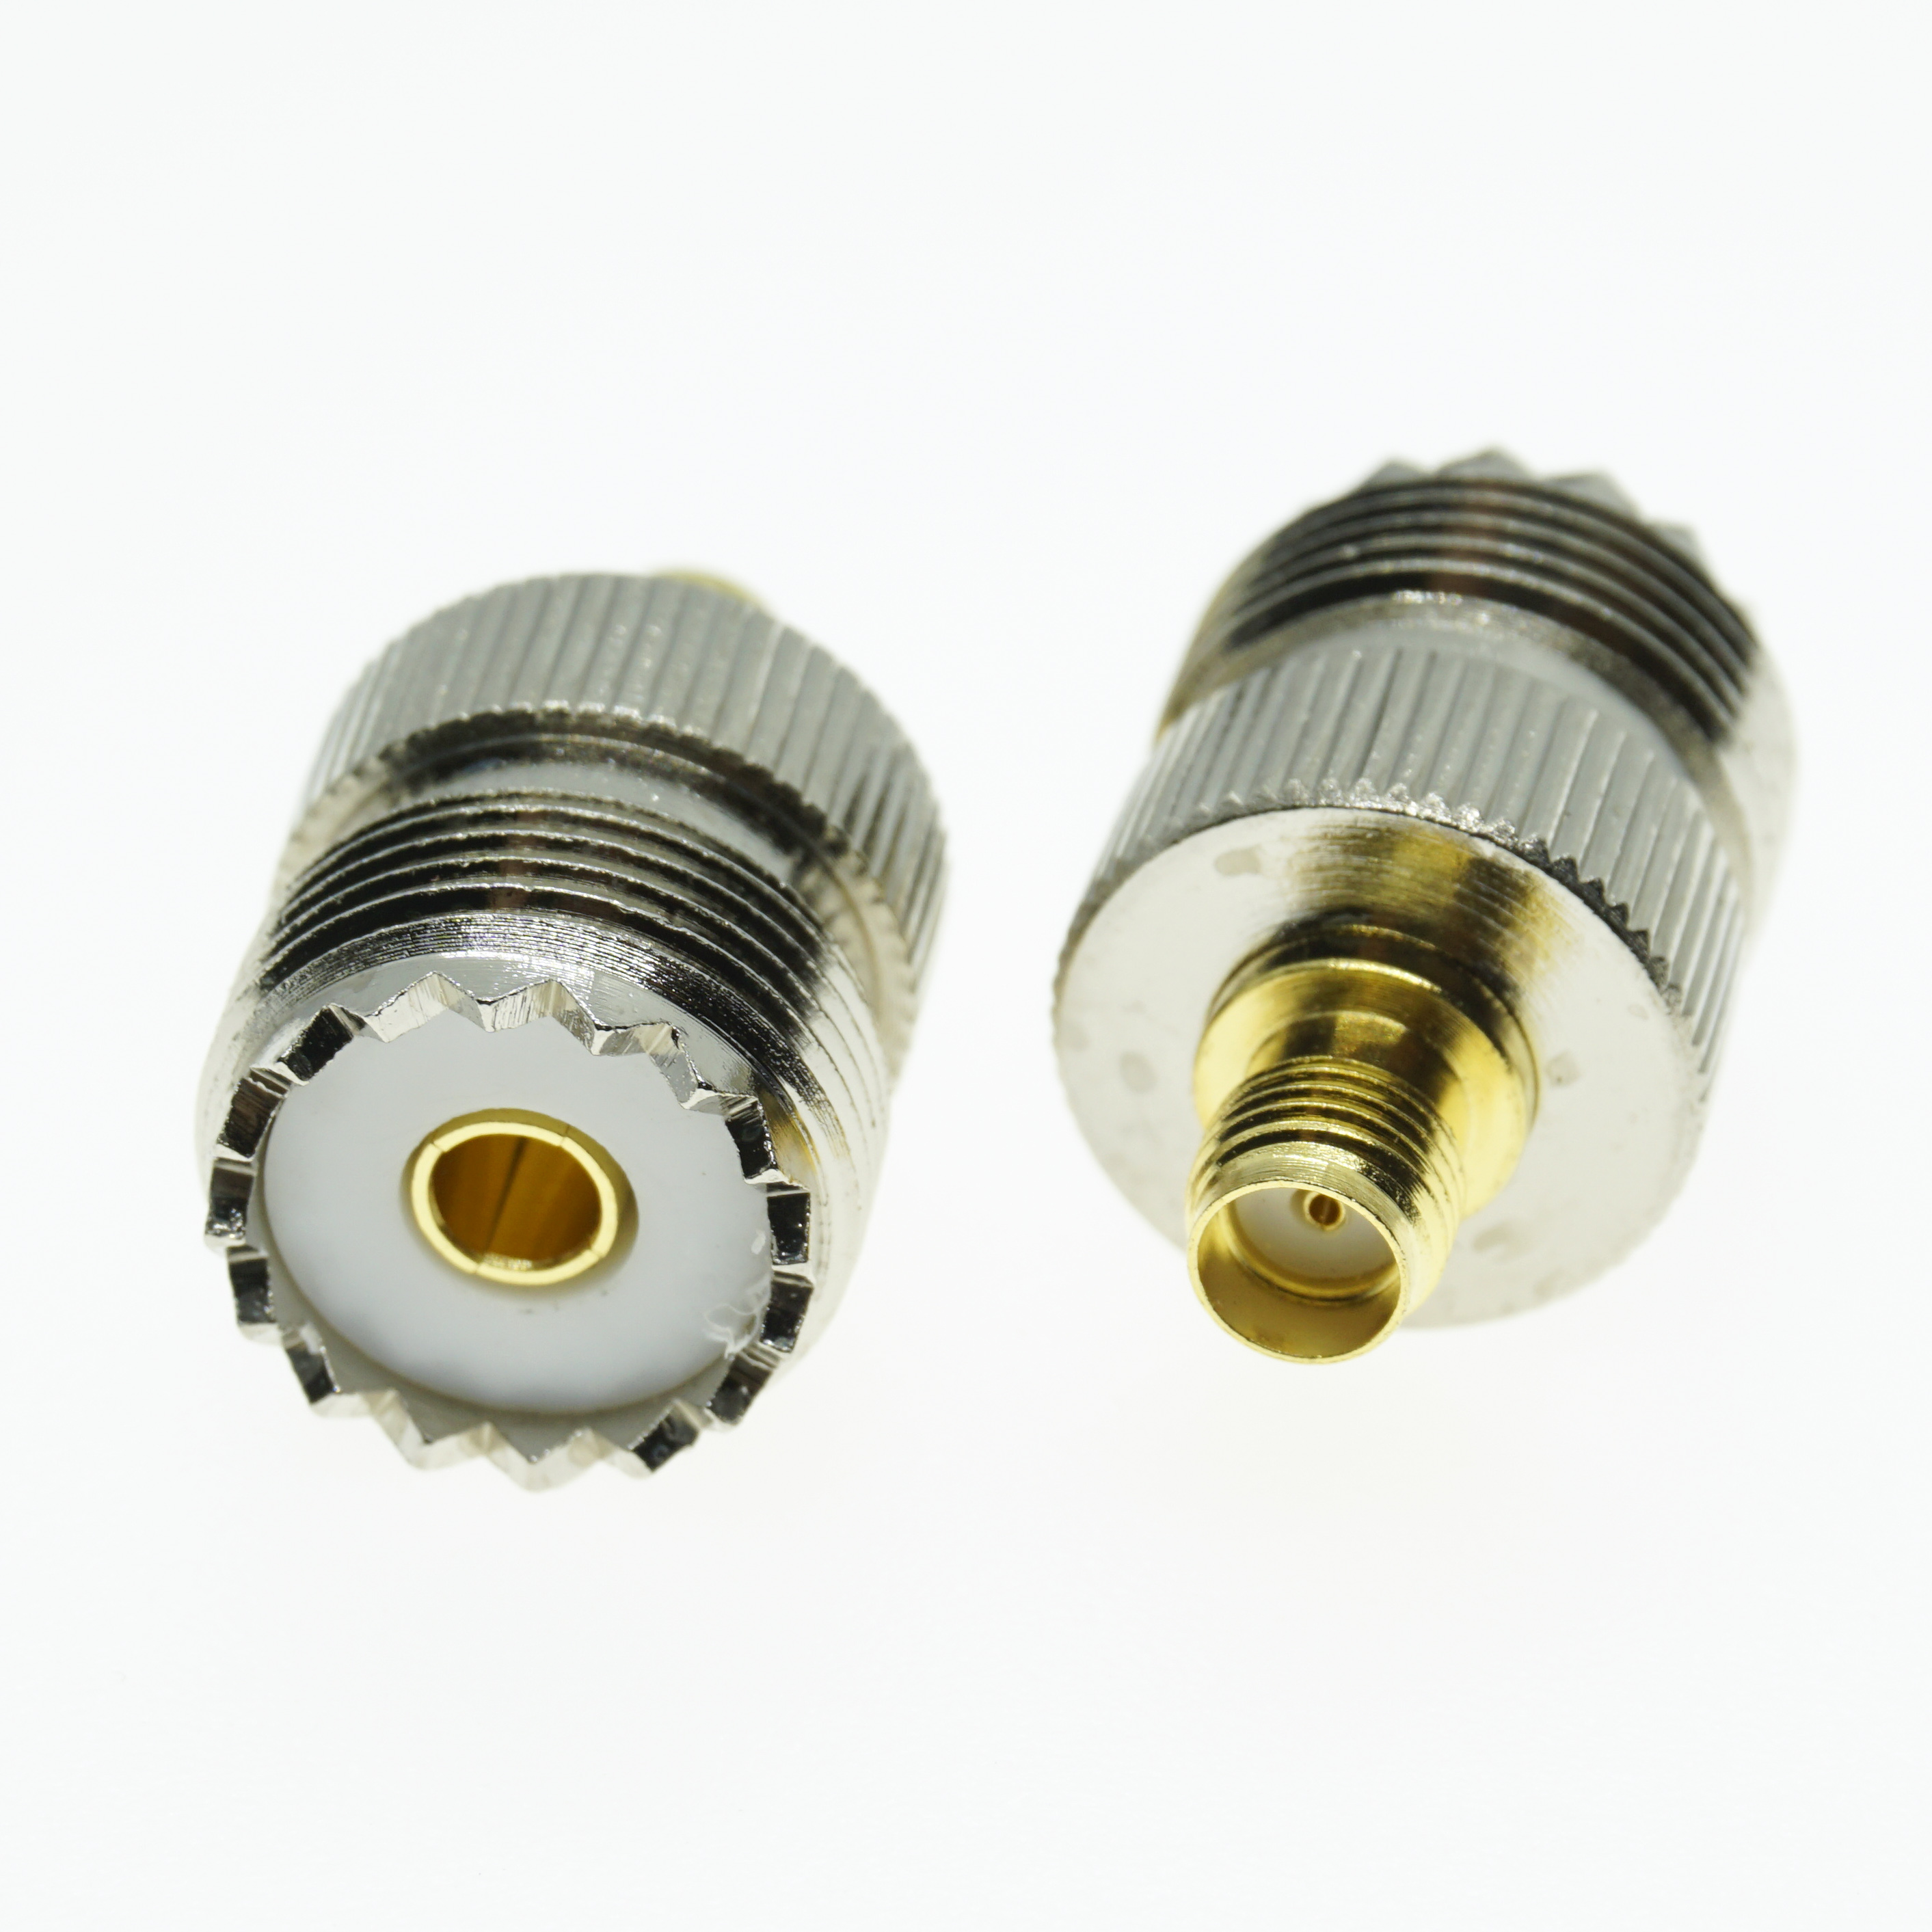 UHF Female SO-239 jack to SMA female jack RF coaxial straight connector adapter 